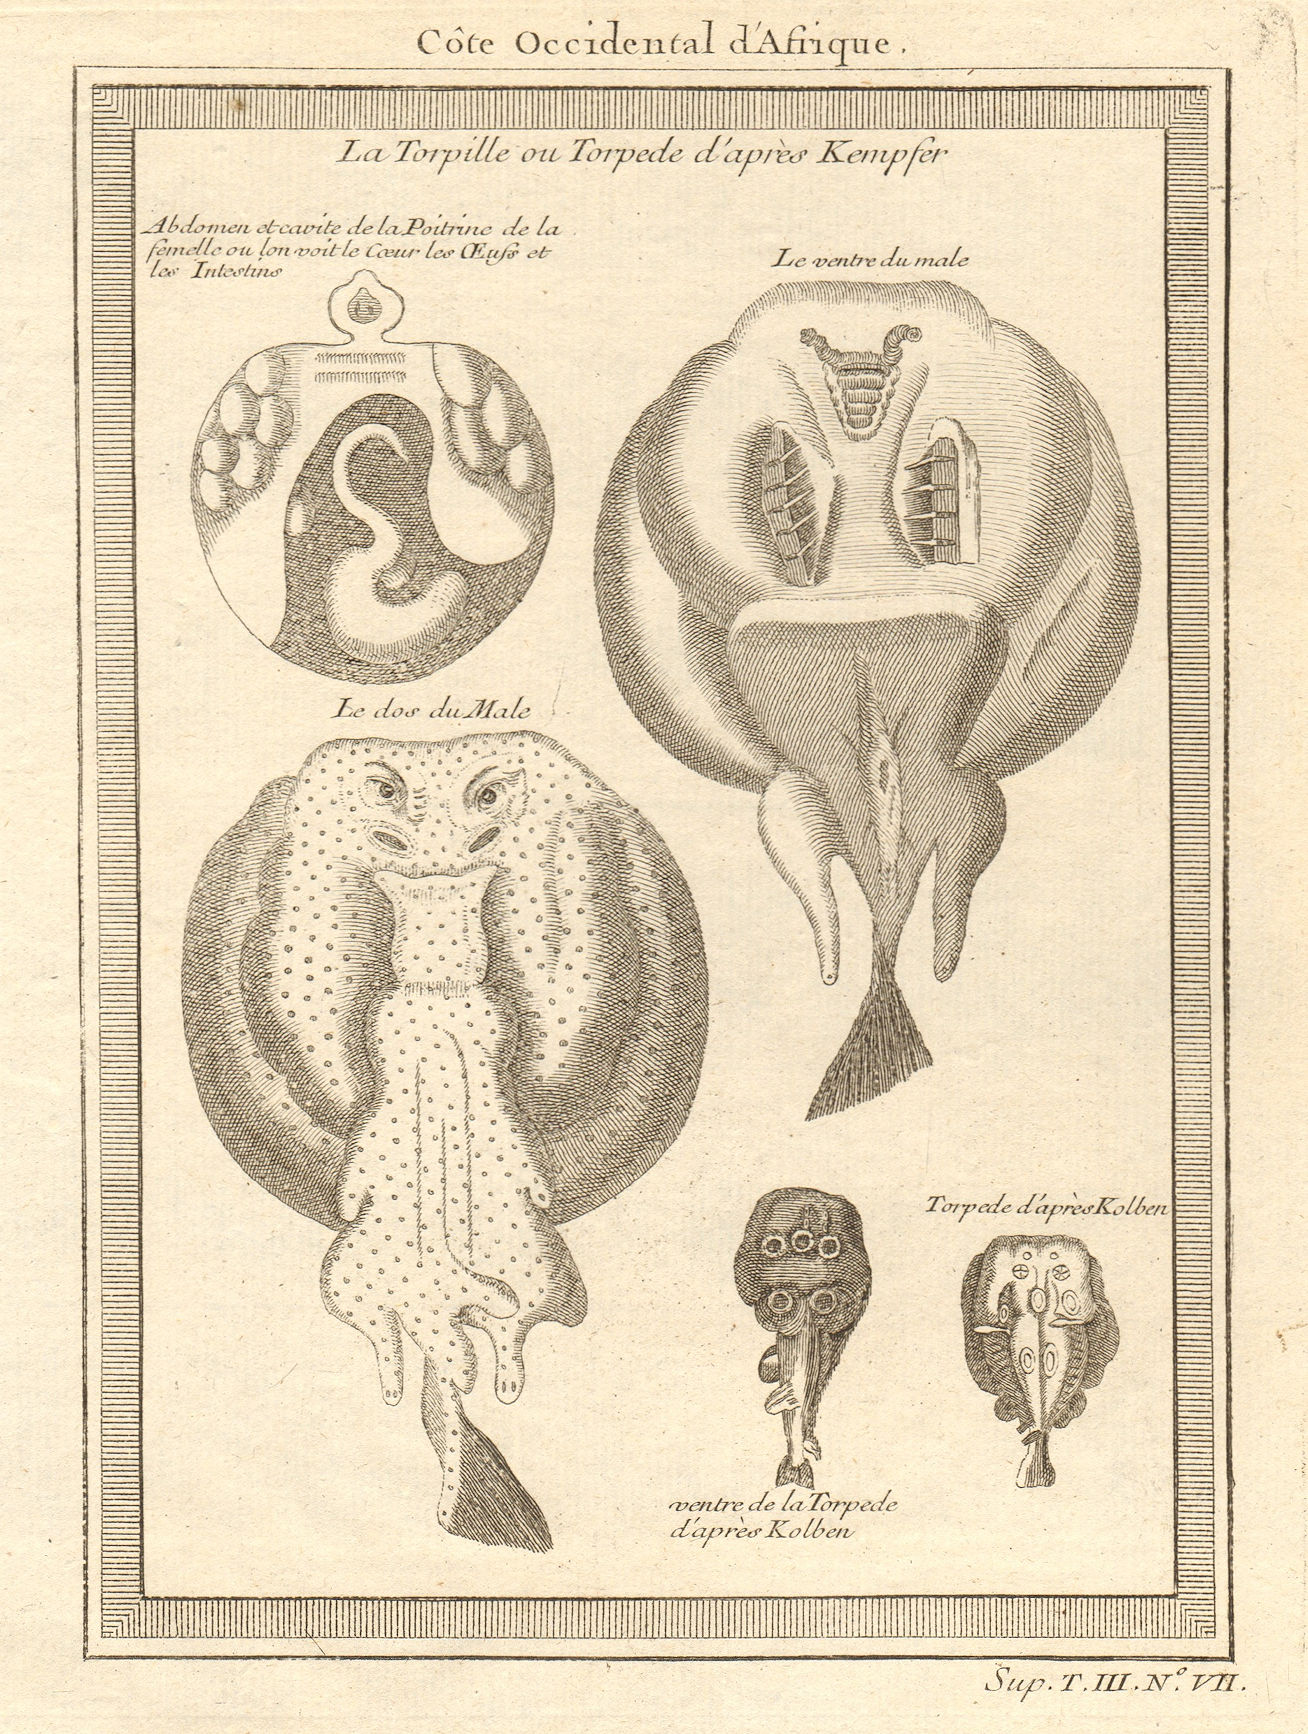 Associate Product West African fish. Torpedo or electric rays after Kempfer 1747 old print